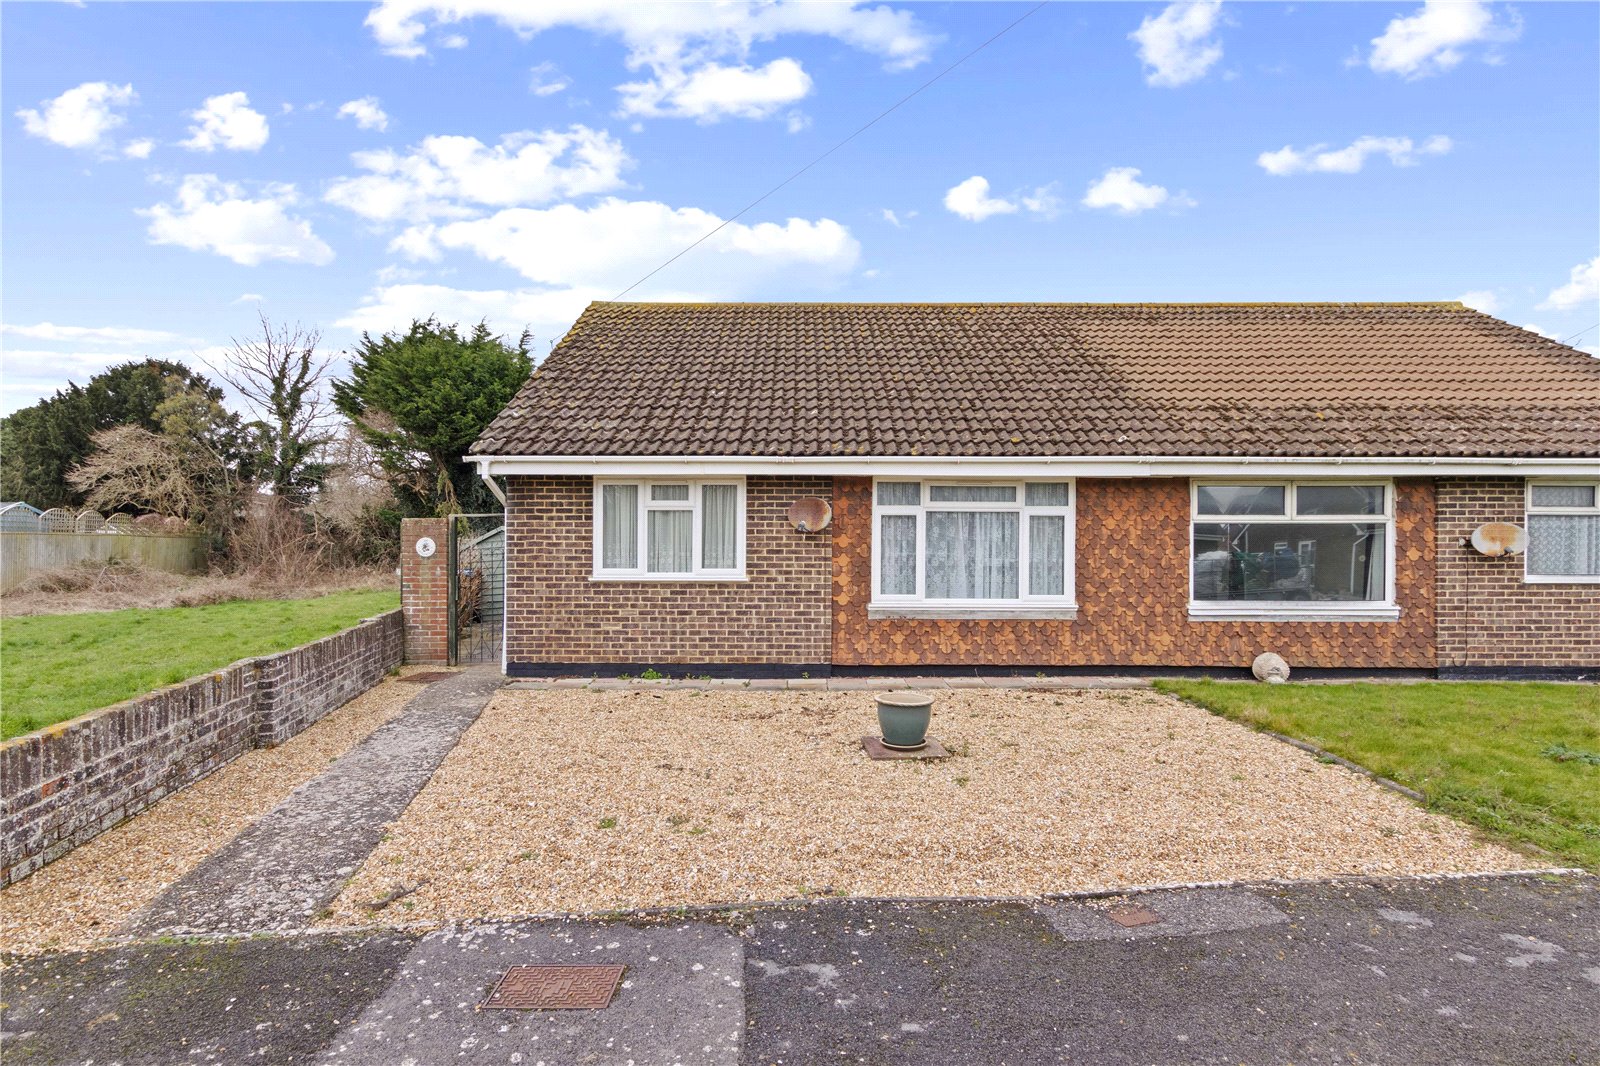 2 bed bungalow for sale in Whitfield Close, Bognor Regis - Property Image 1